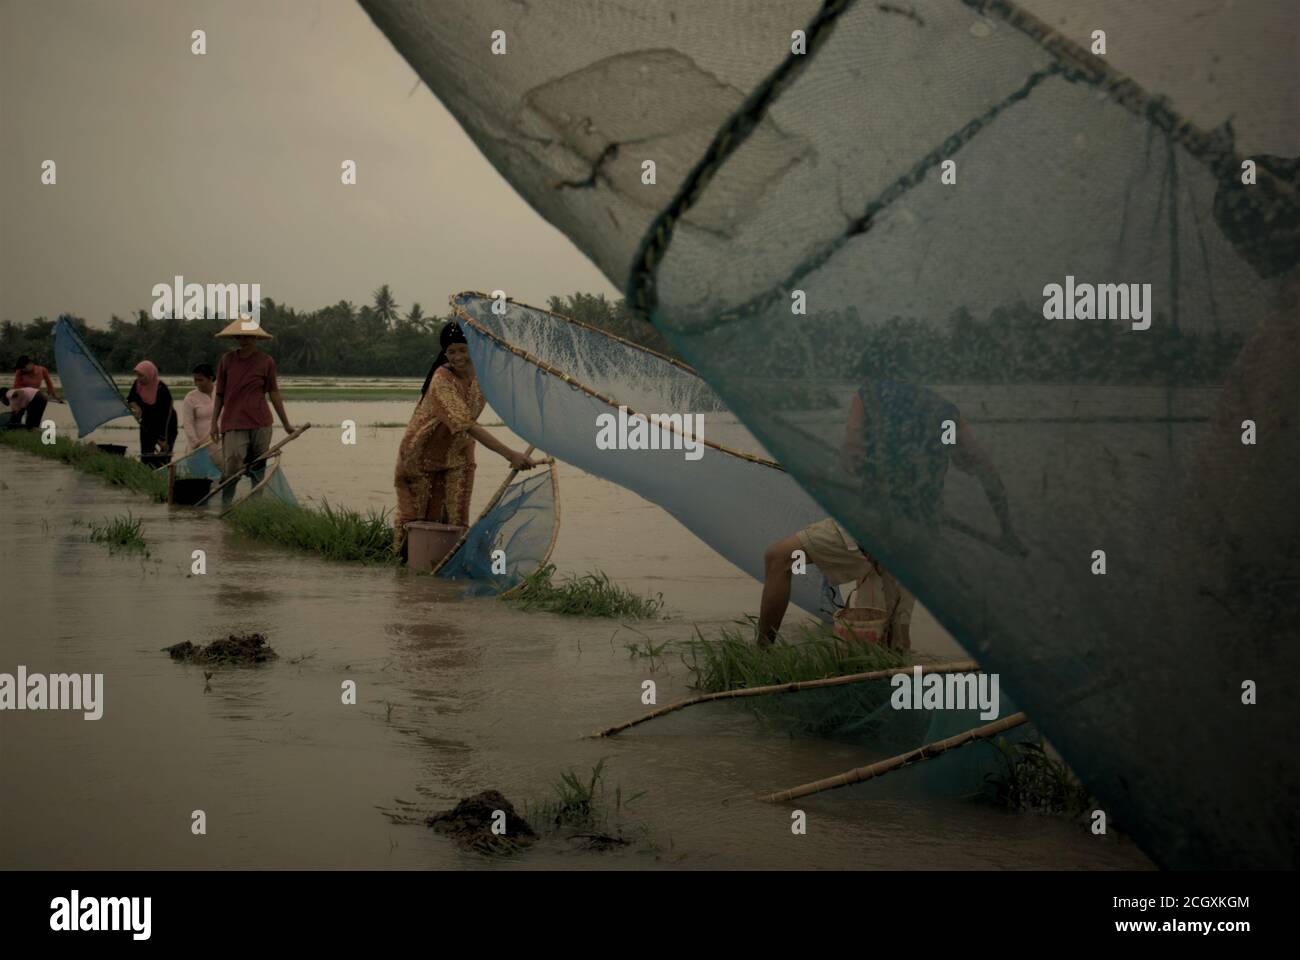 People fishing on a flooded rice field with pushnets during a rainy season which causing floods in Karawang regency, West Java province, Indonesia. Stock Photo